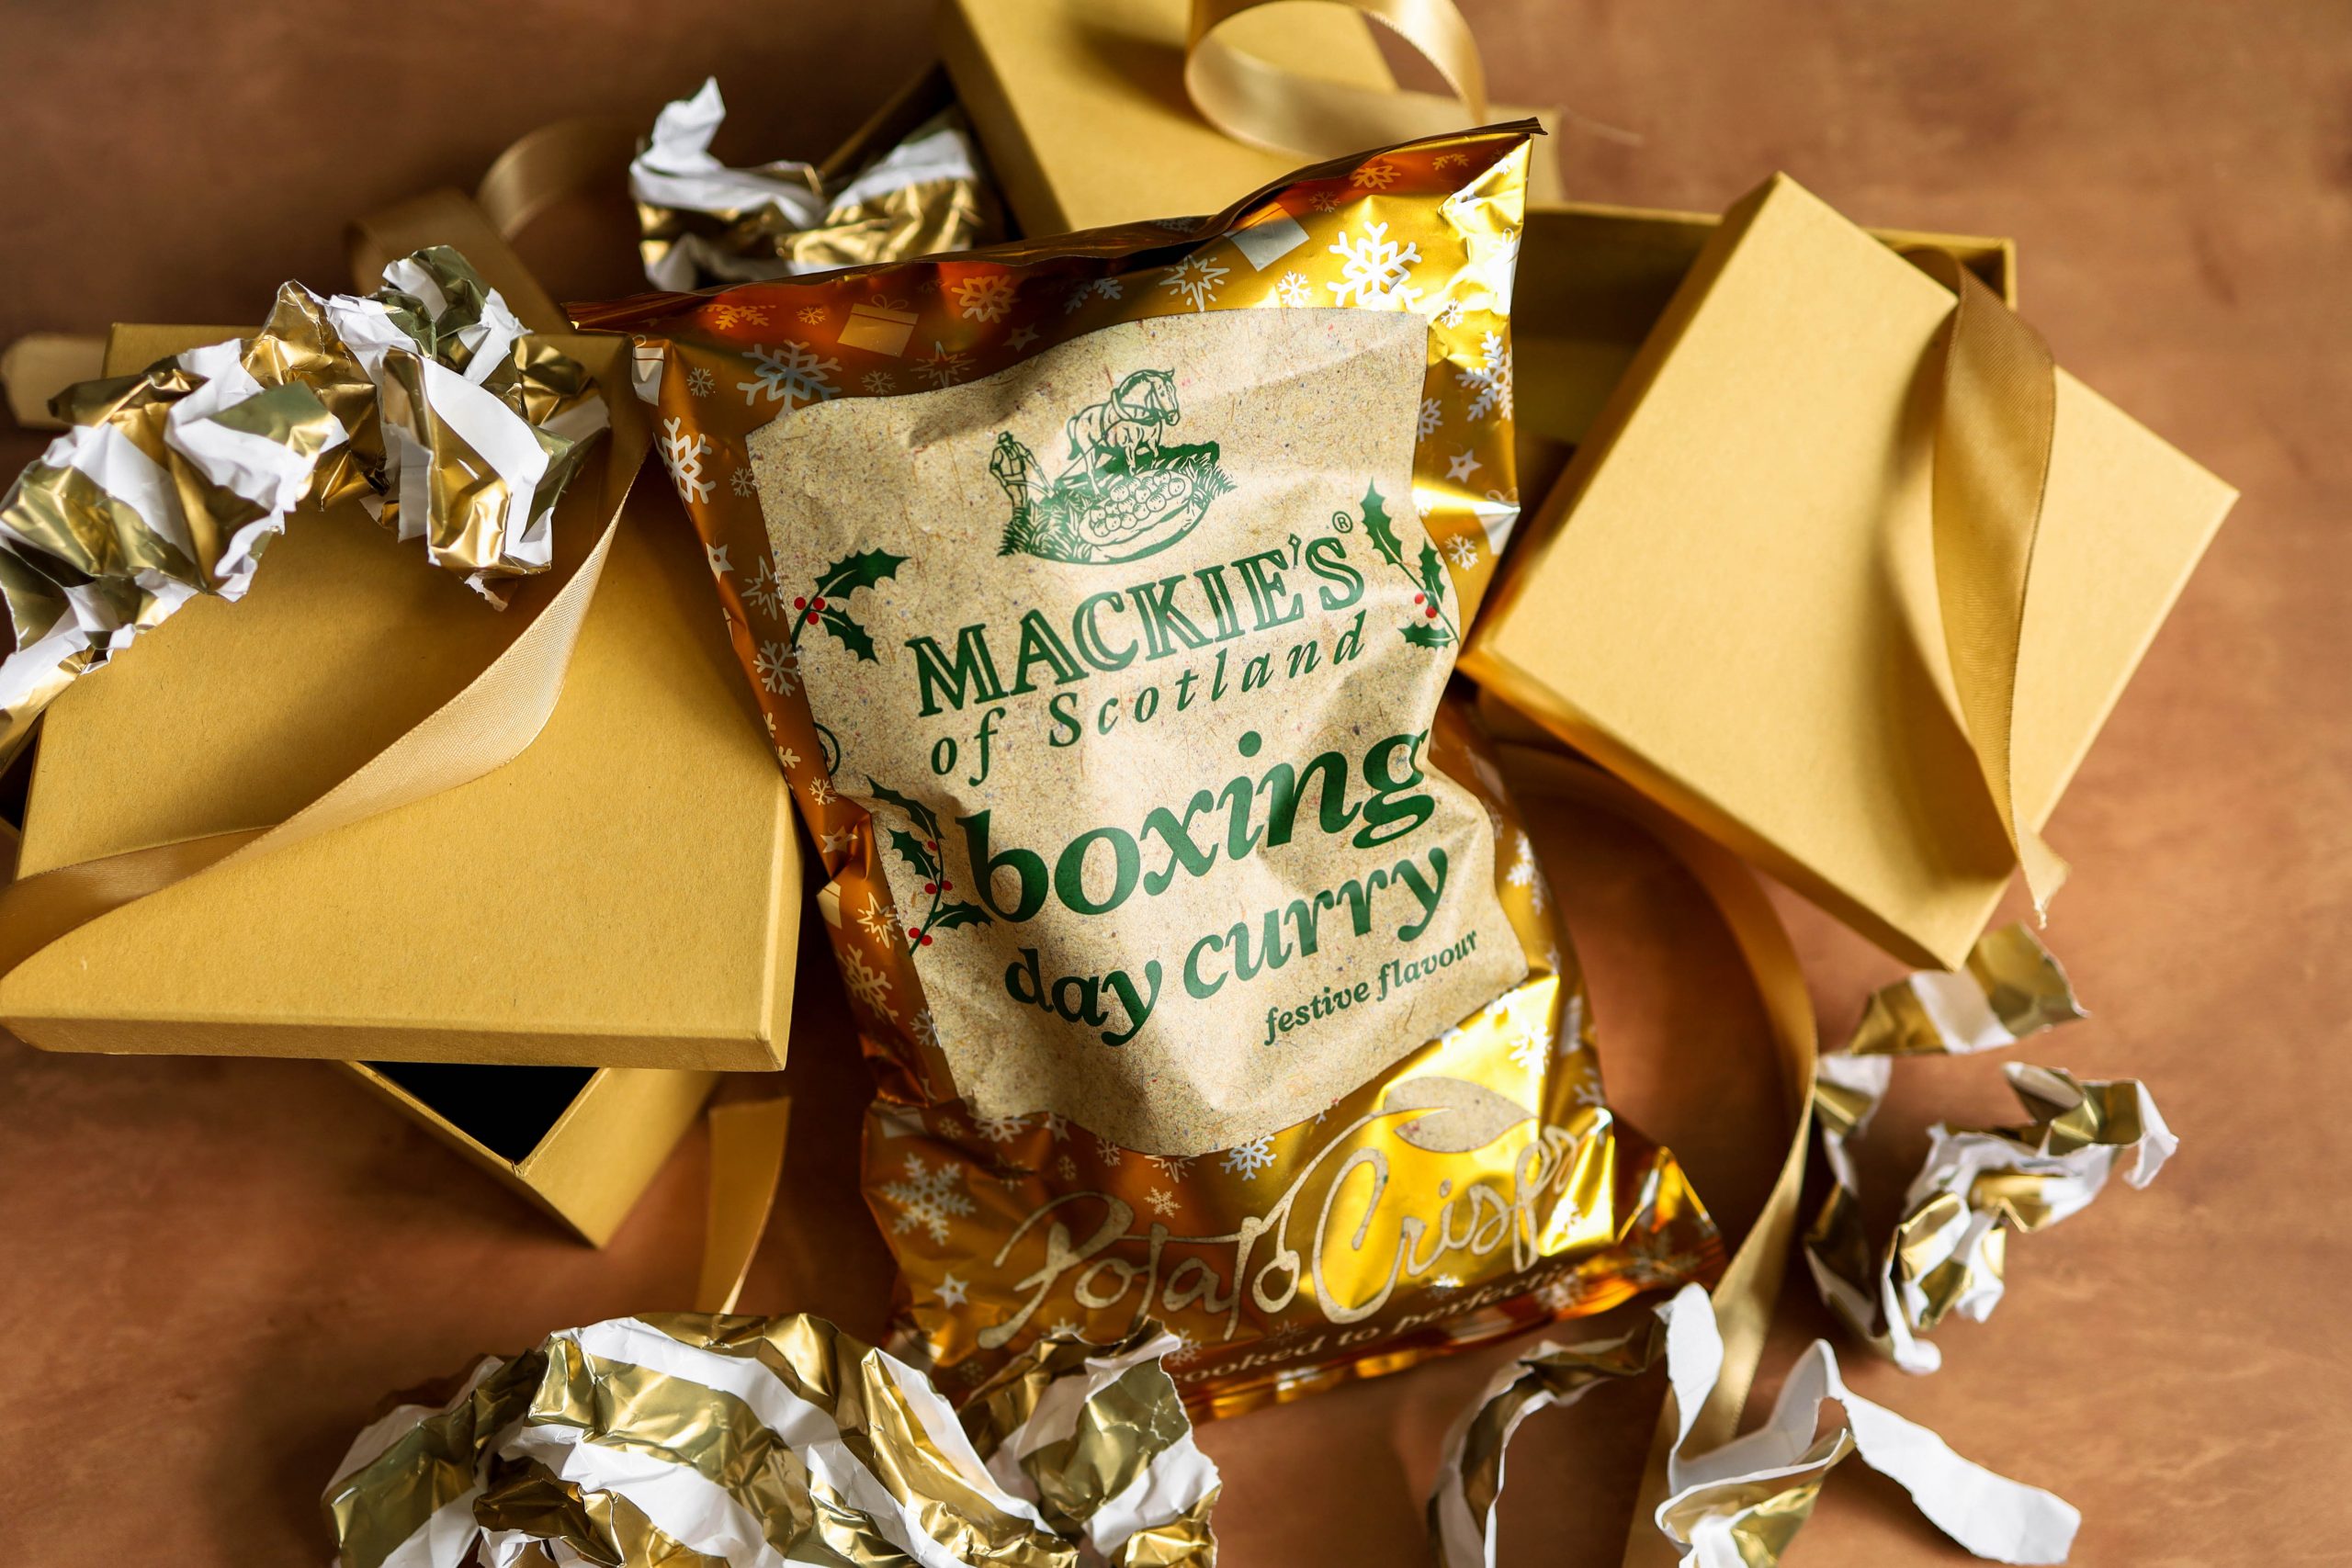 Food and drink PR photography, Scottish snack brand provide an early taste of Boxing Day